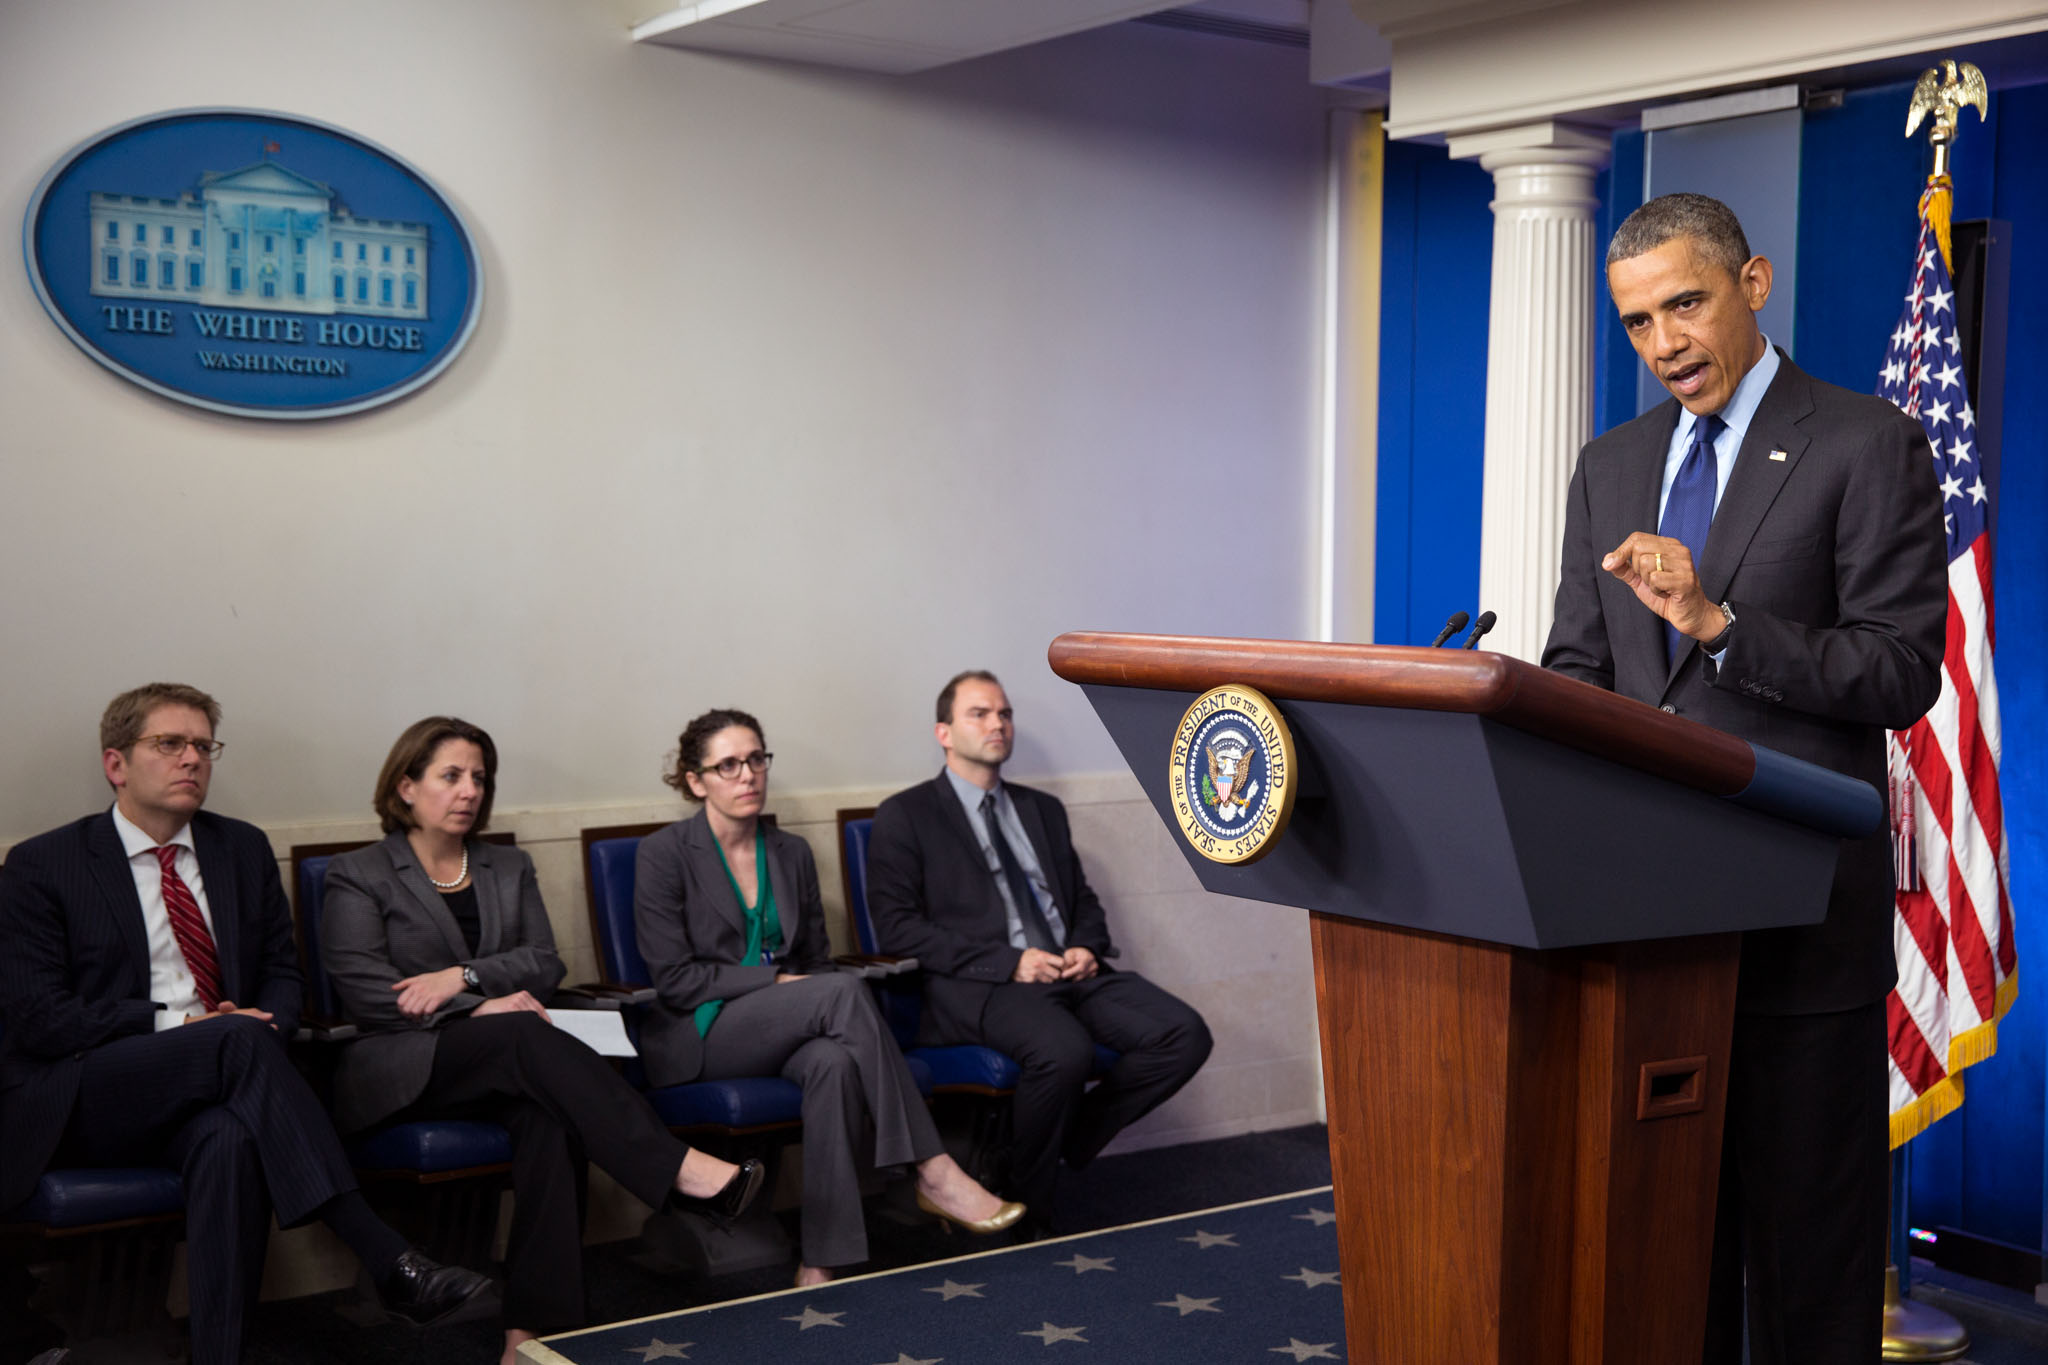 President Barack Obama makes a statement at the White House (April 19, 2013)